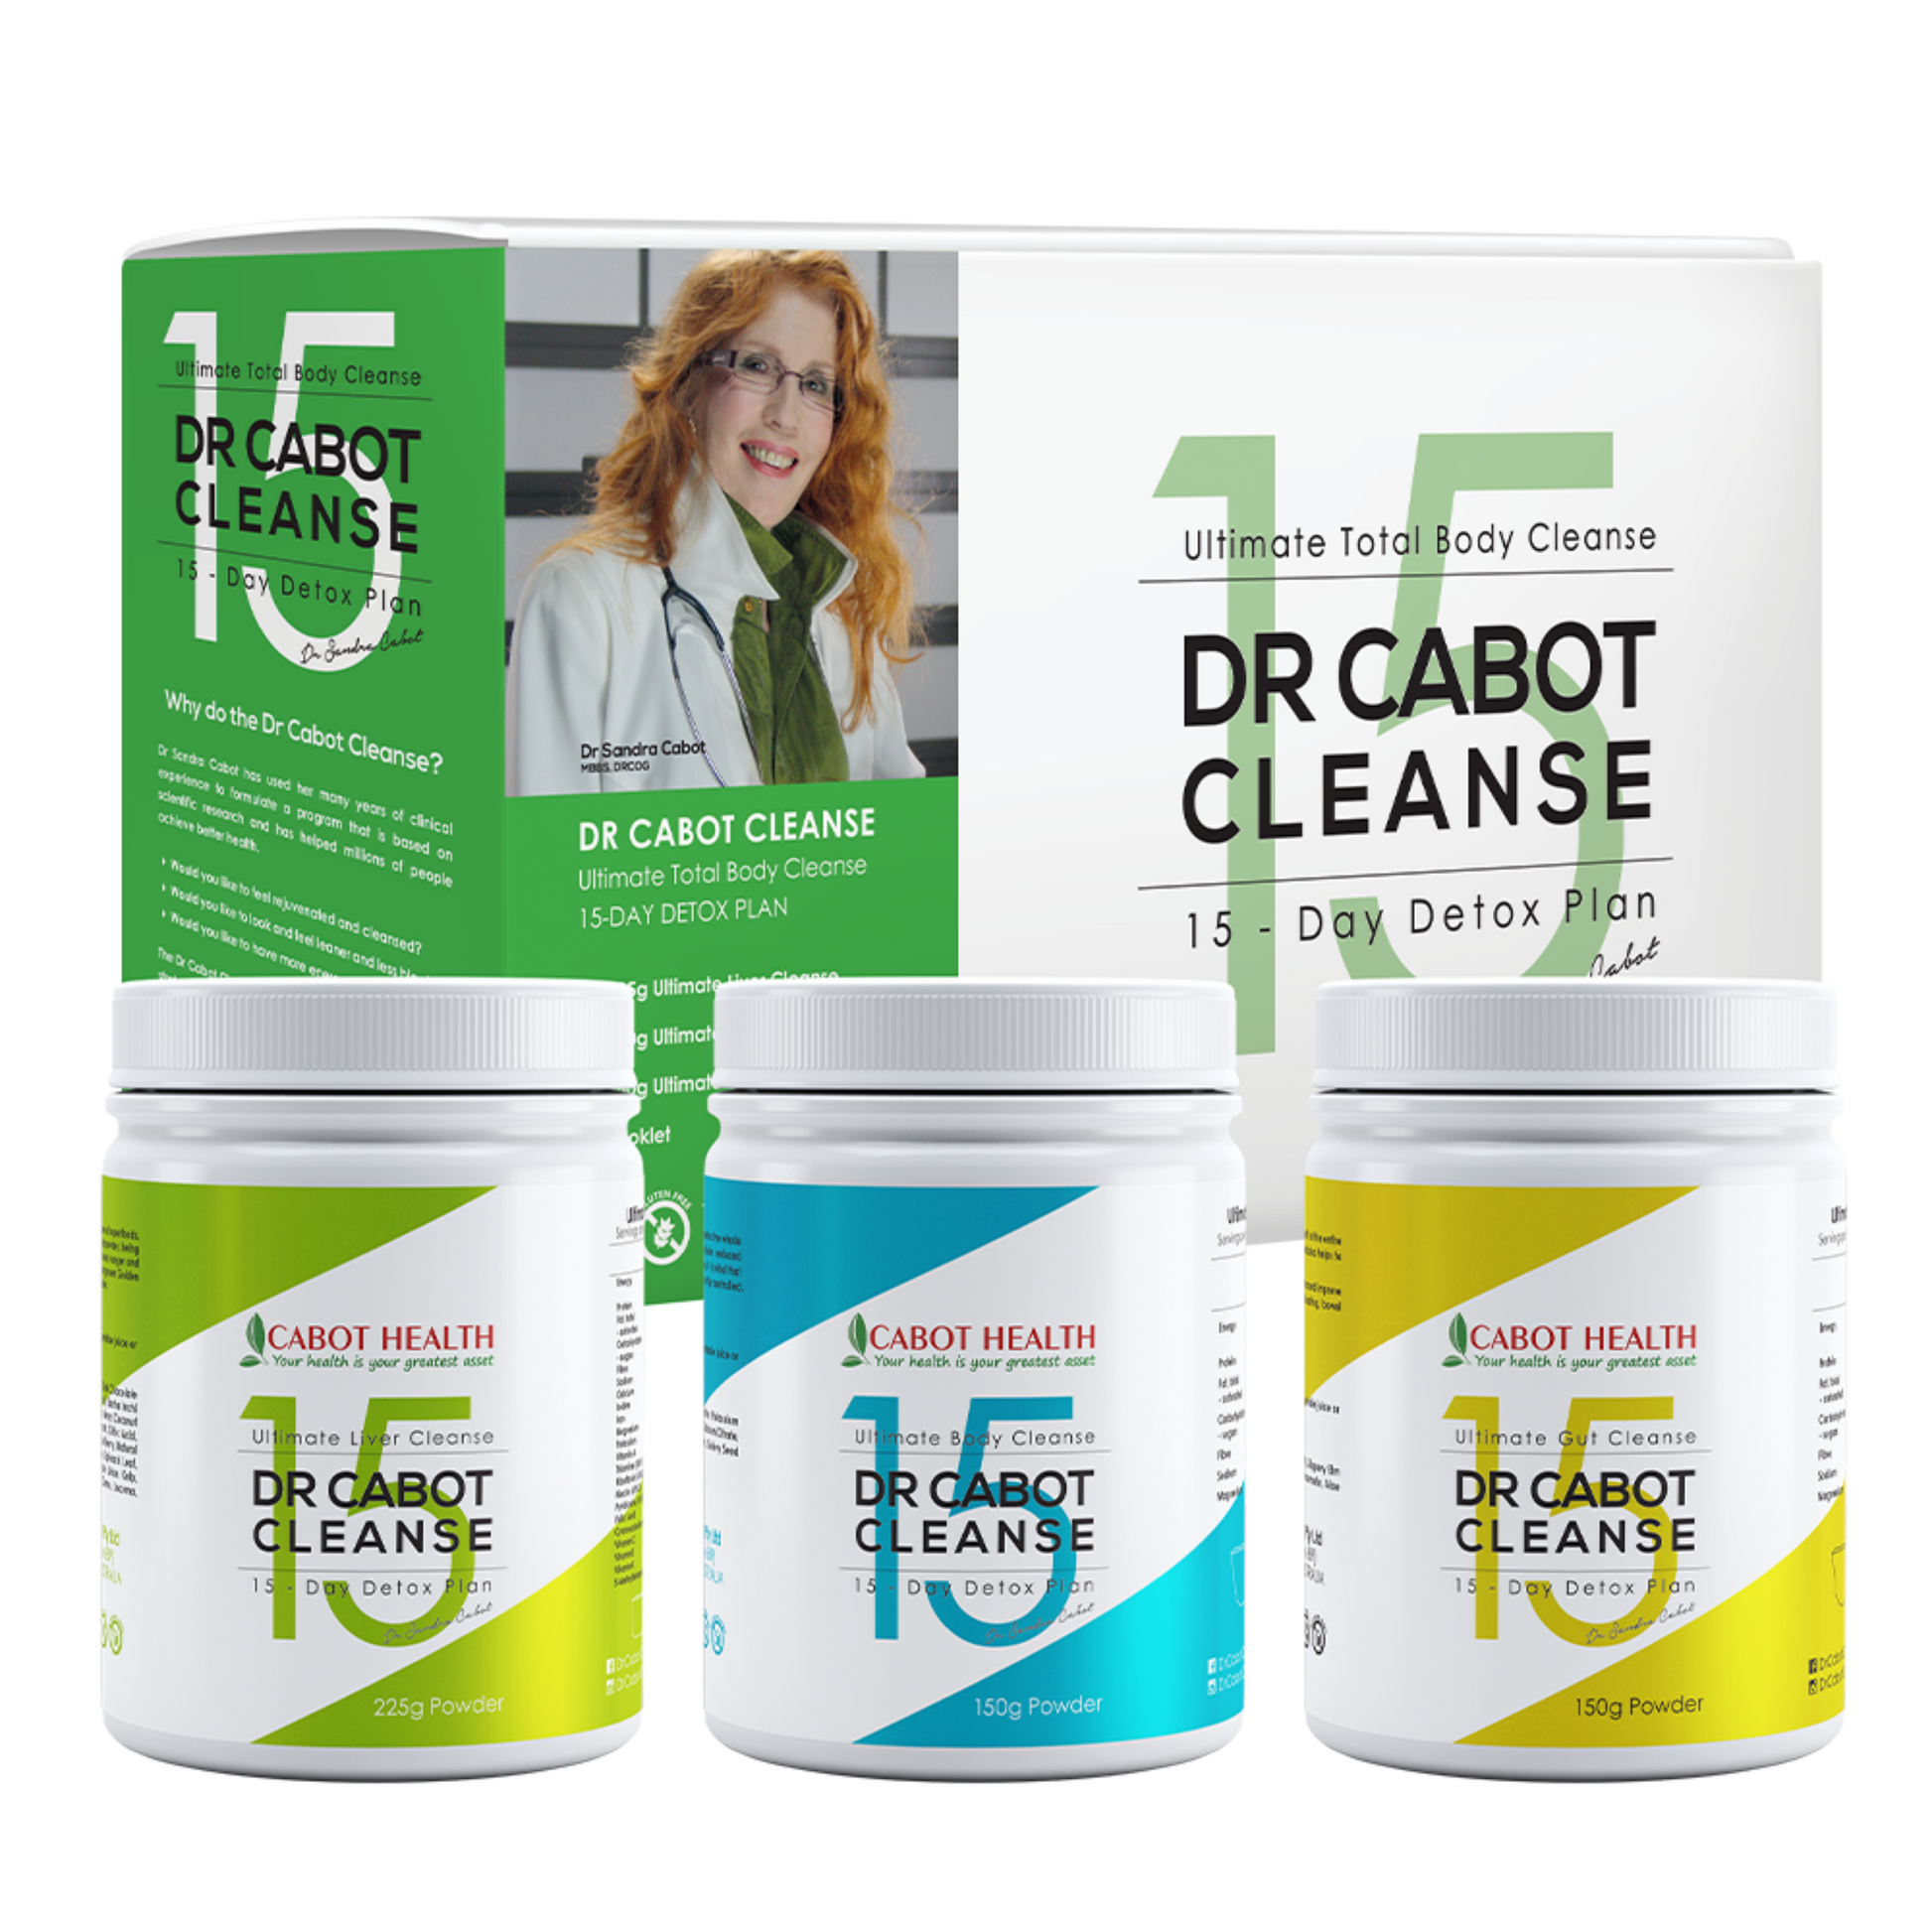 Dr. Cabot Cleanse Cabot Health Ultimate total body cleanse – 15 day detox plan